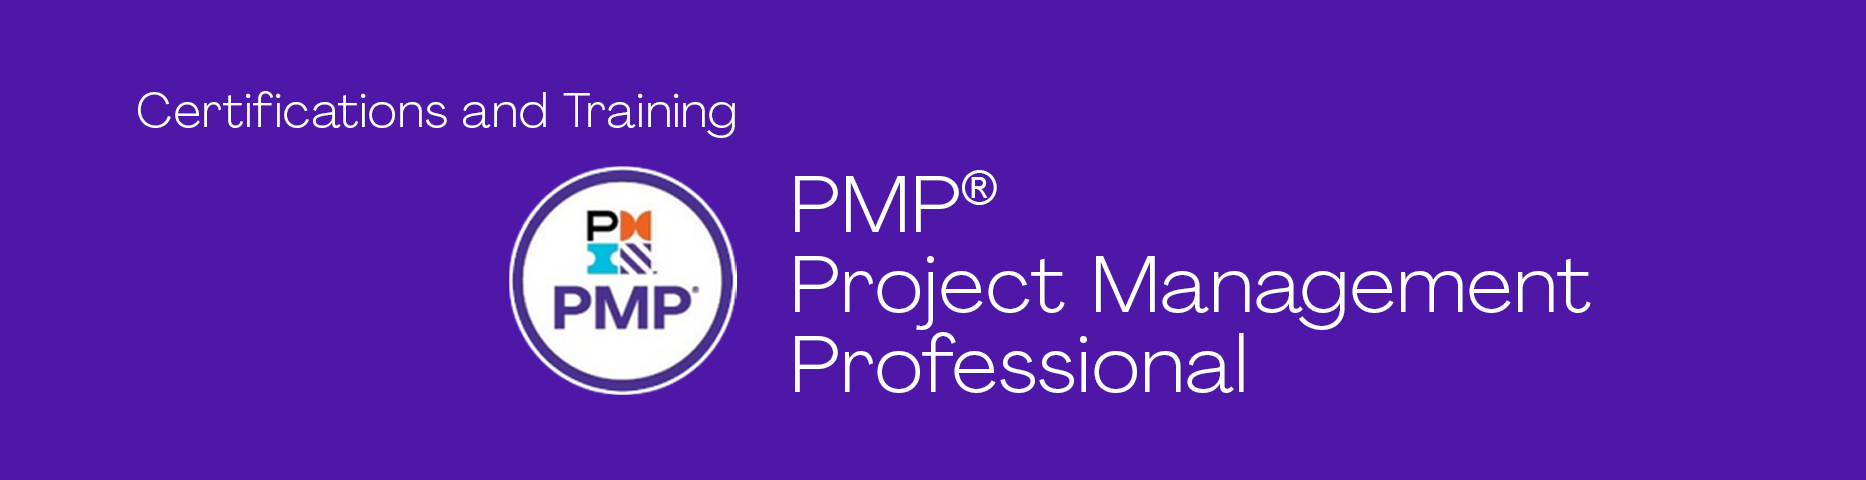 PMP_Masthead_3.png